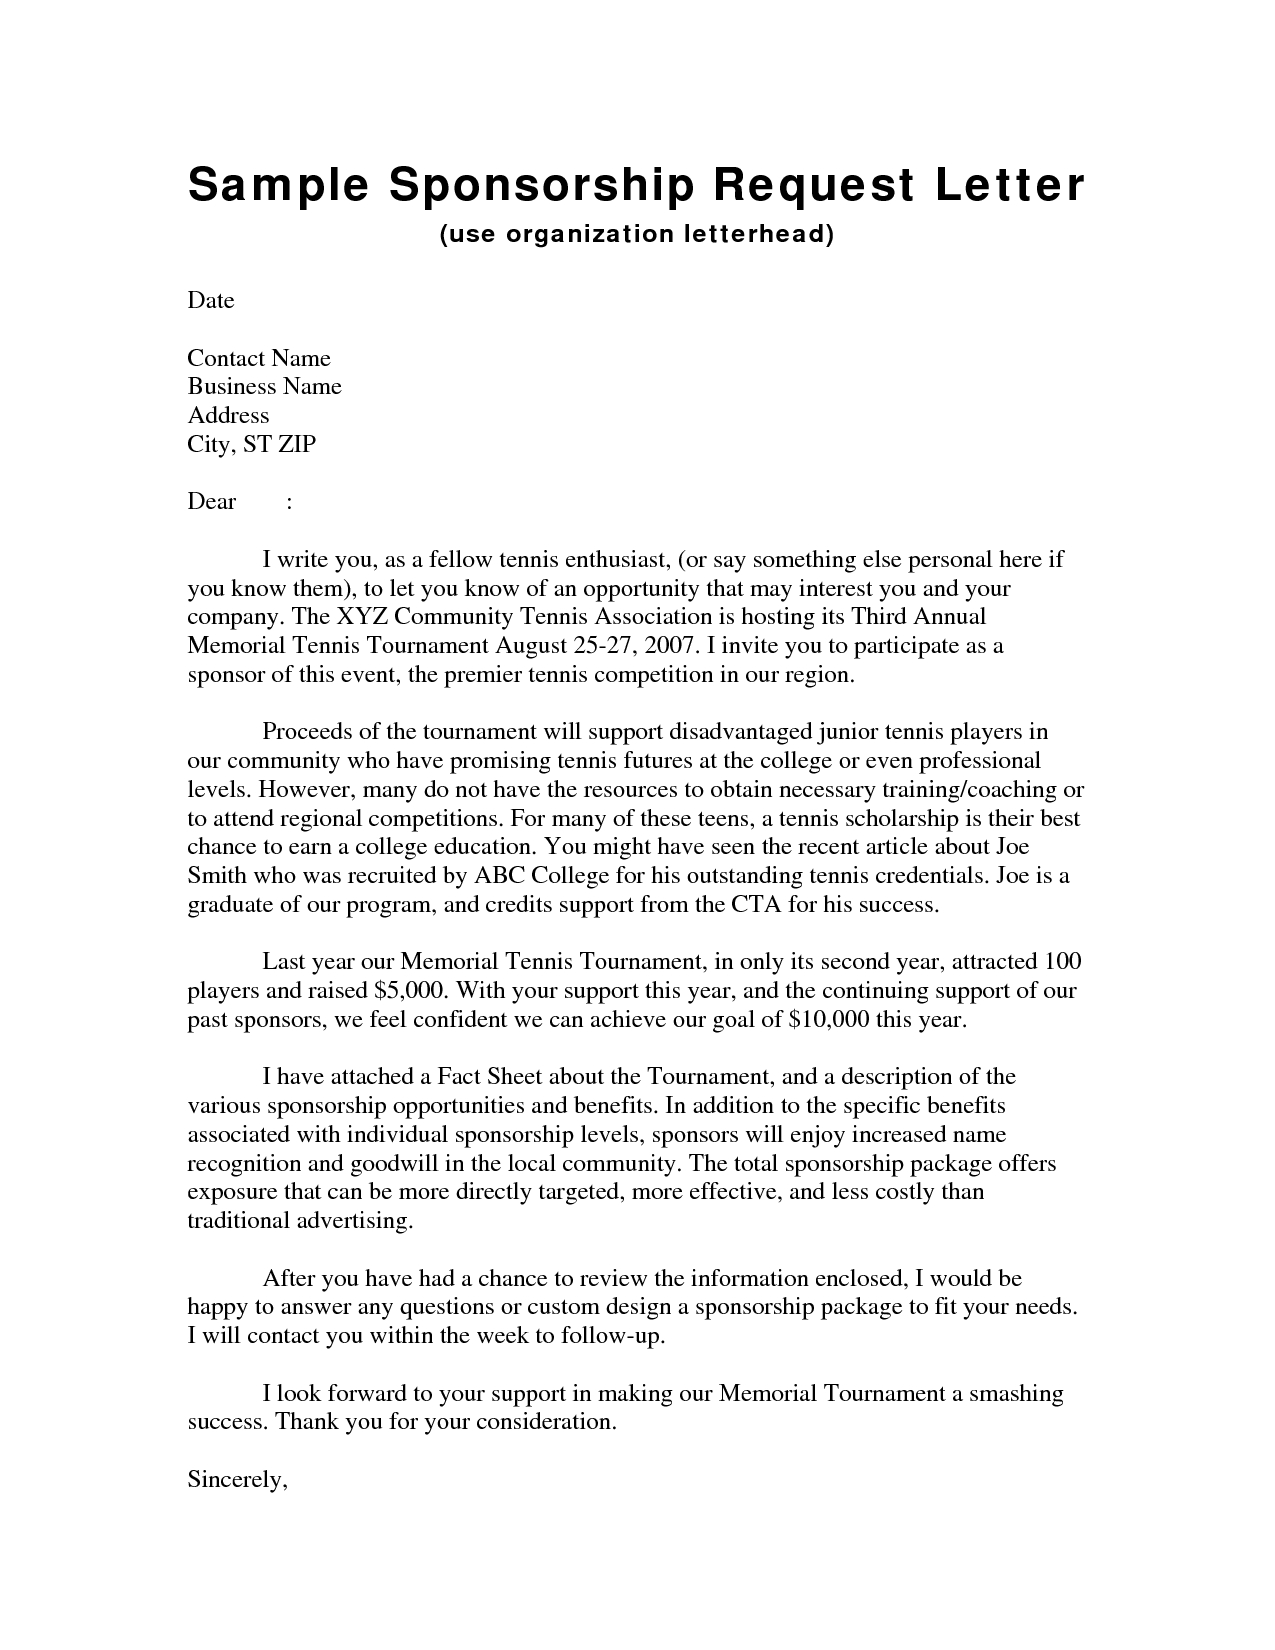 Event Sponsorship Letter Template - How to Write A Letter Requesting Sponsorship Gallery Letter format